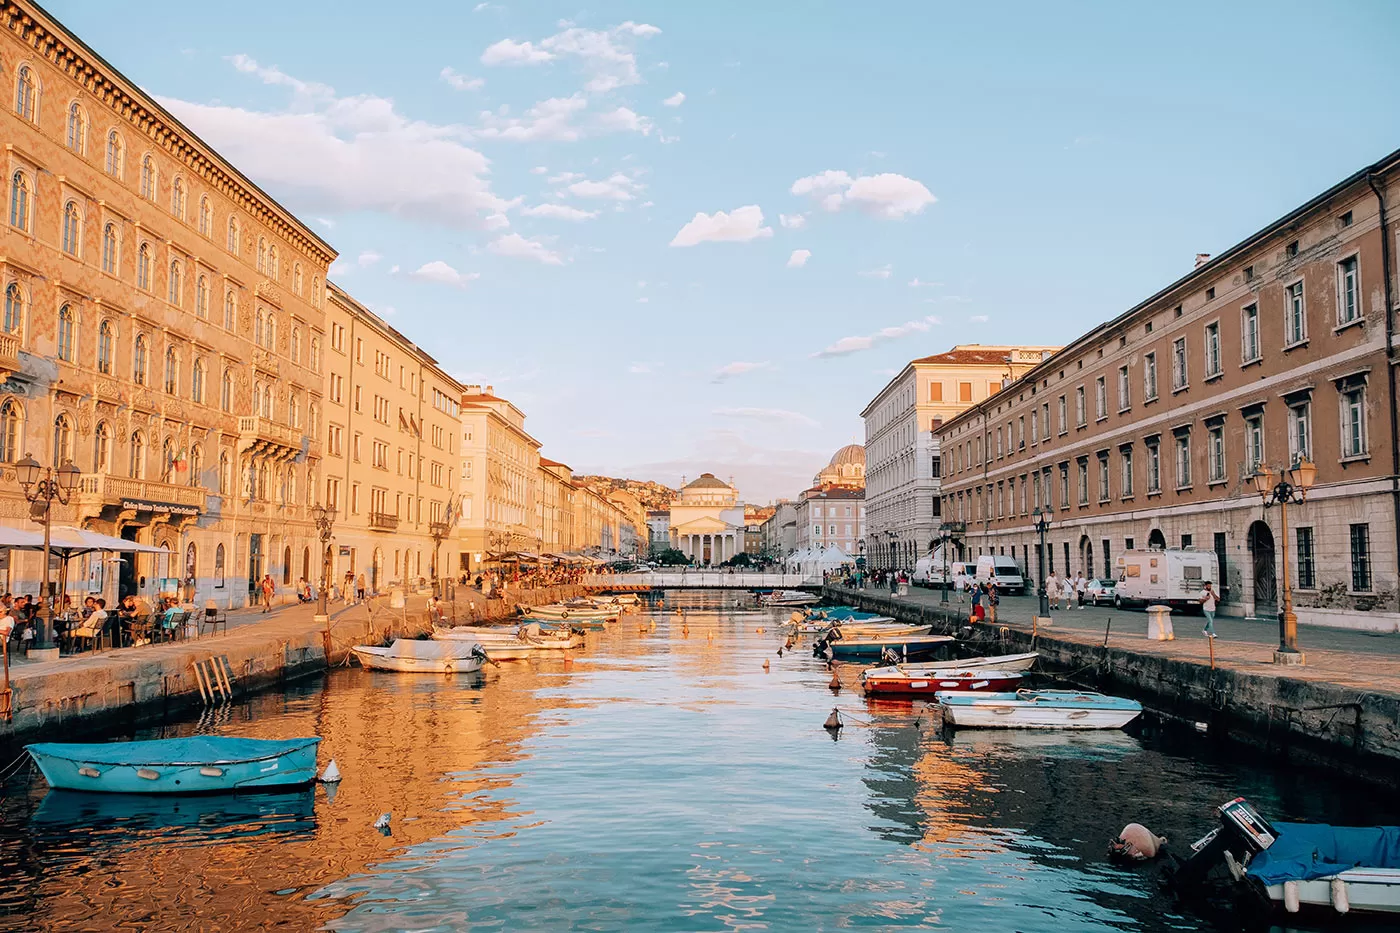 Best Things to Do in Trieste Italy - Grand Canal